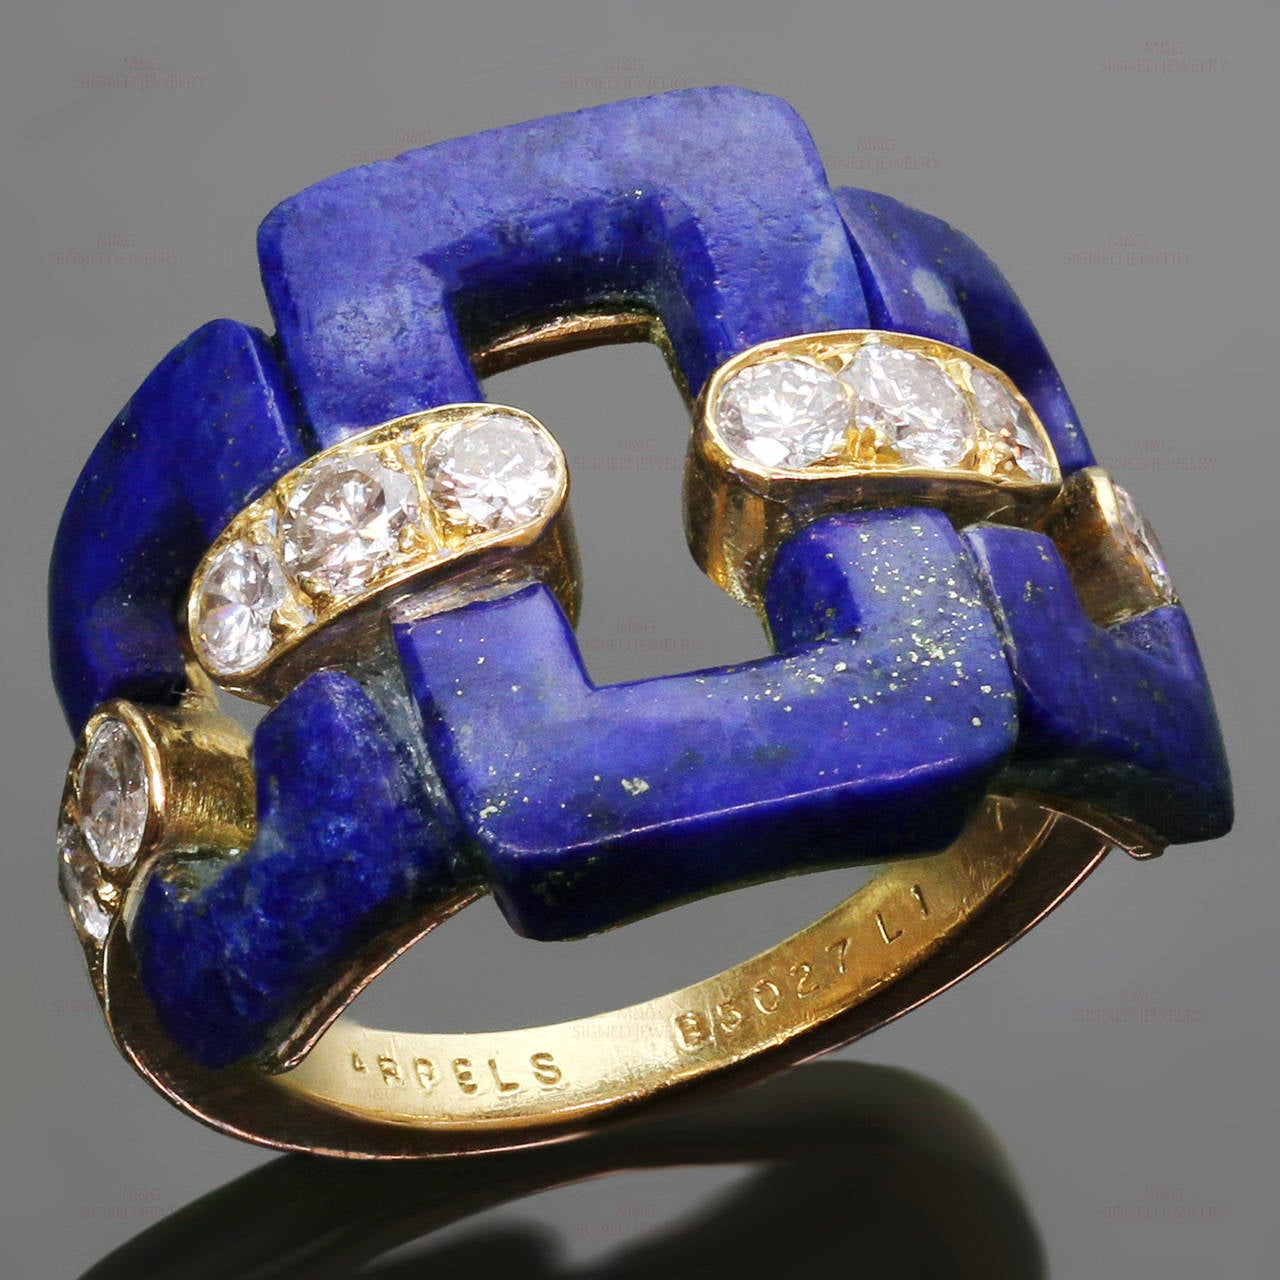 This fabulous Van Cleef & Arpels ring is crafted in 18k yellow gold and beautifully adorned with lapis lazuli stones and brilliant-cut round diamonds of an estimated 0.50 carats. Made in France circa 1960s. Measurements: 0.59